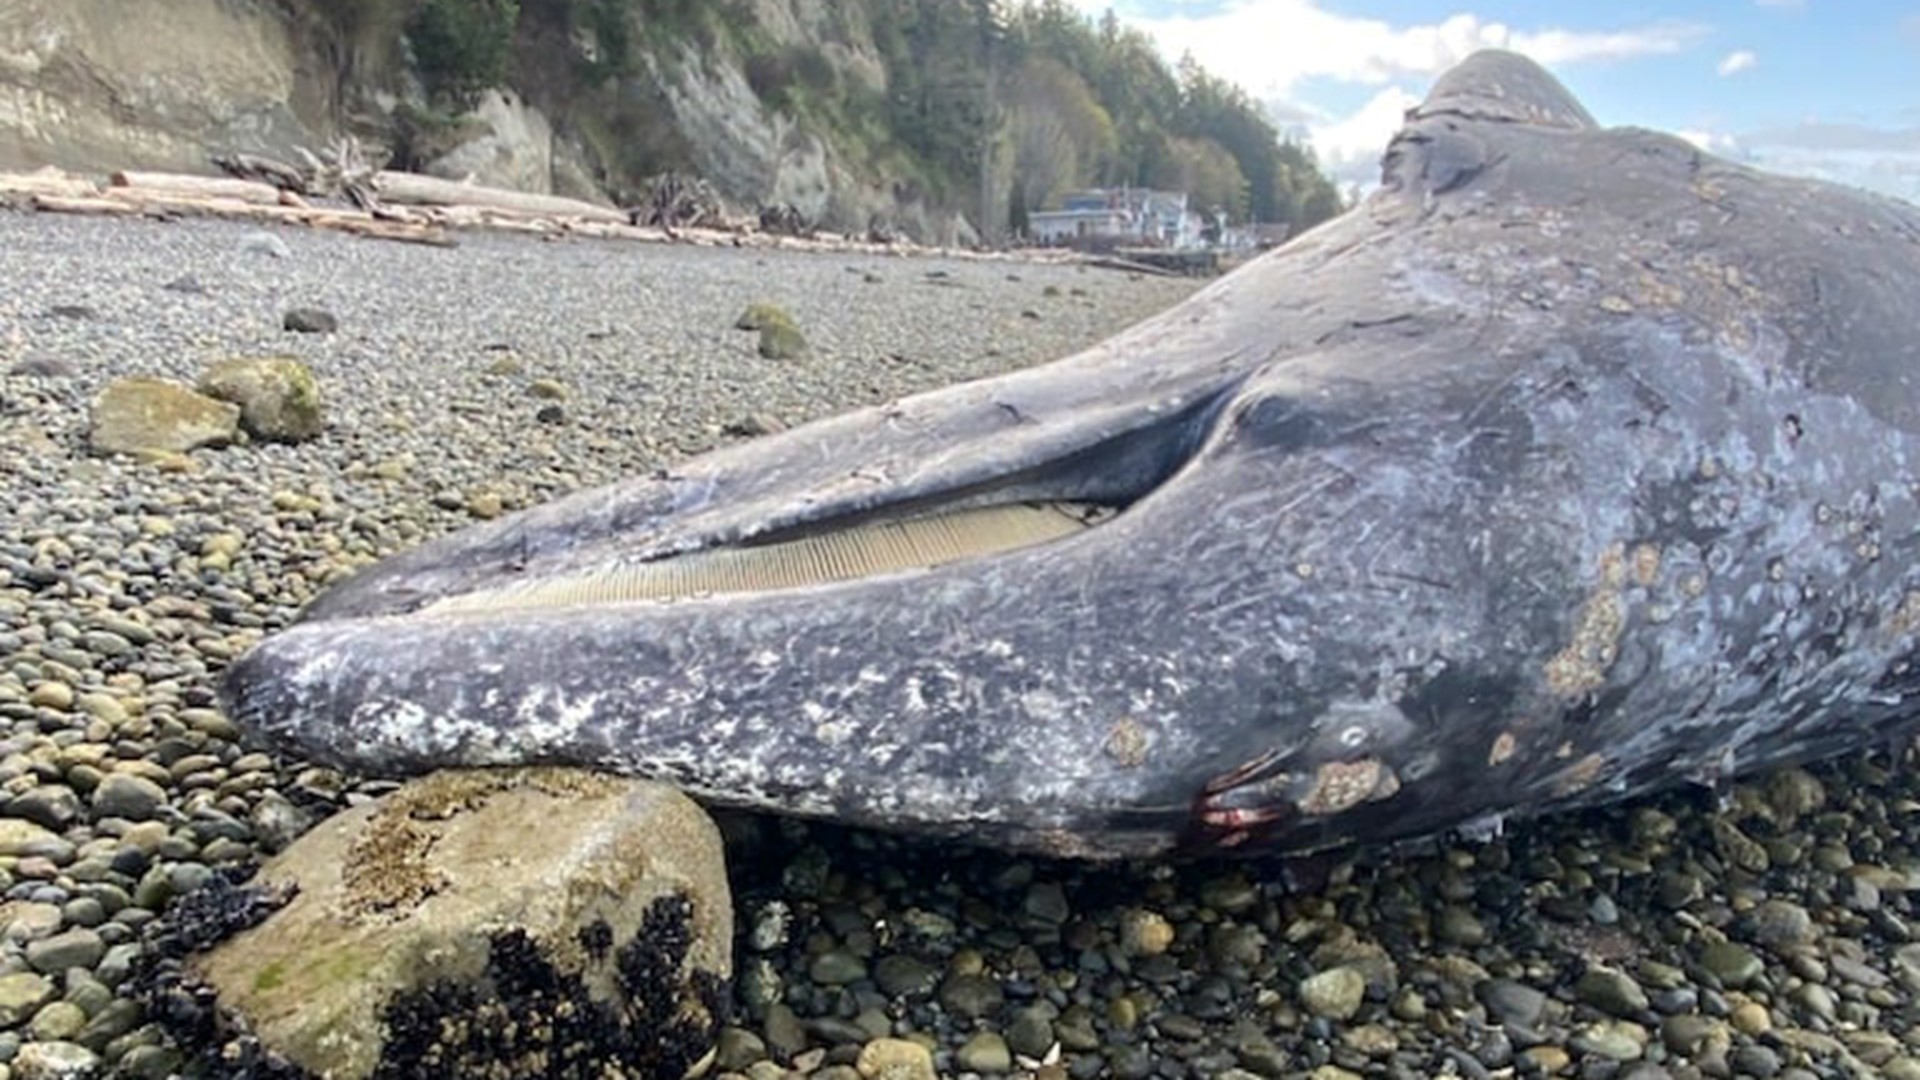 A 39-foot gray whale was found dead on the west side of Camano Island. Officials said malnutrition “was likely a significant factor to its mortality.”